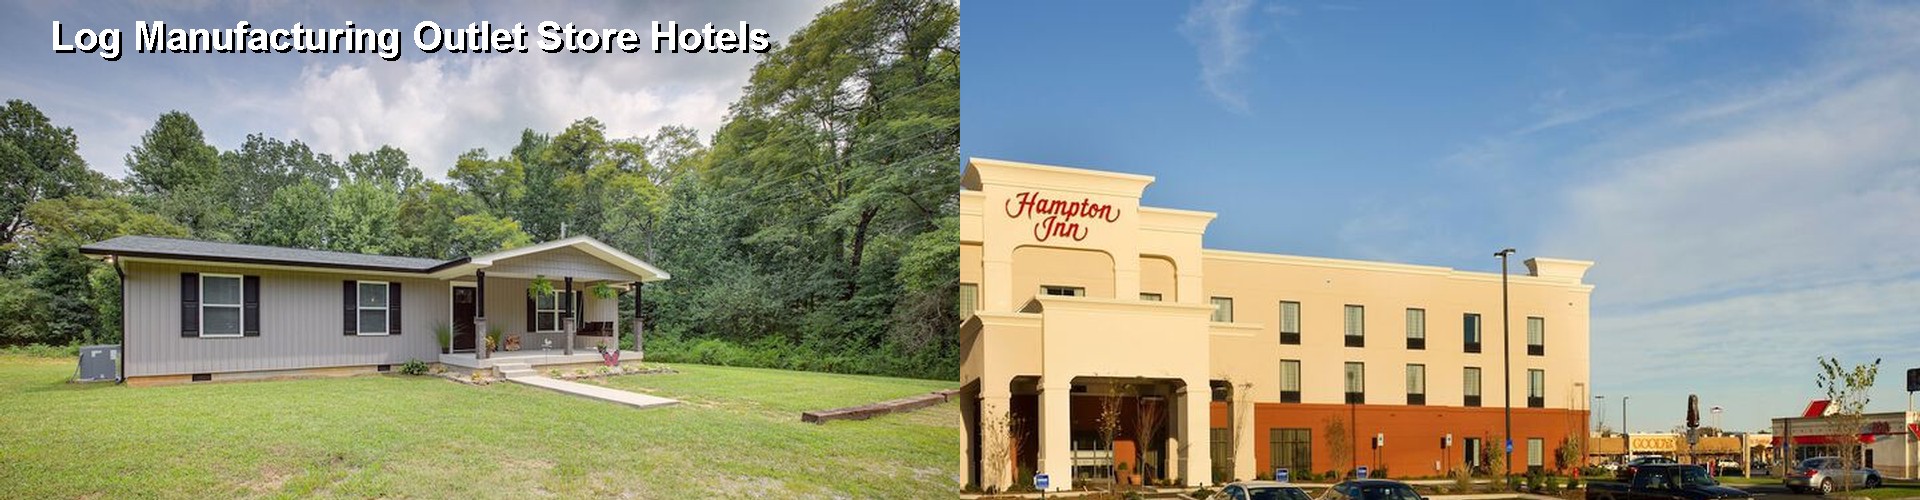 5 Best Hotels near Log Manufacturing Outlet Store